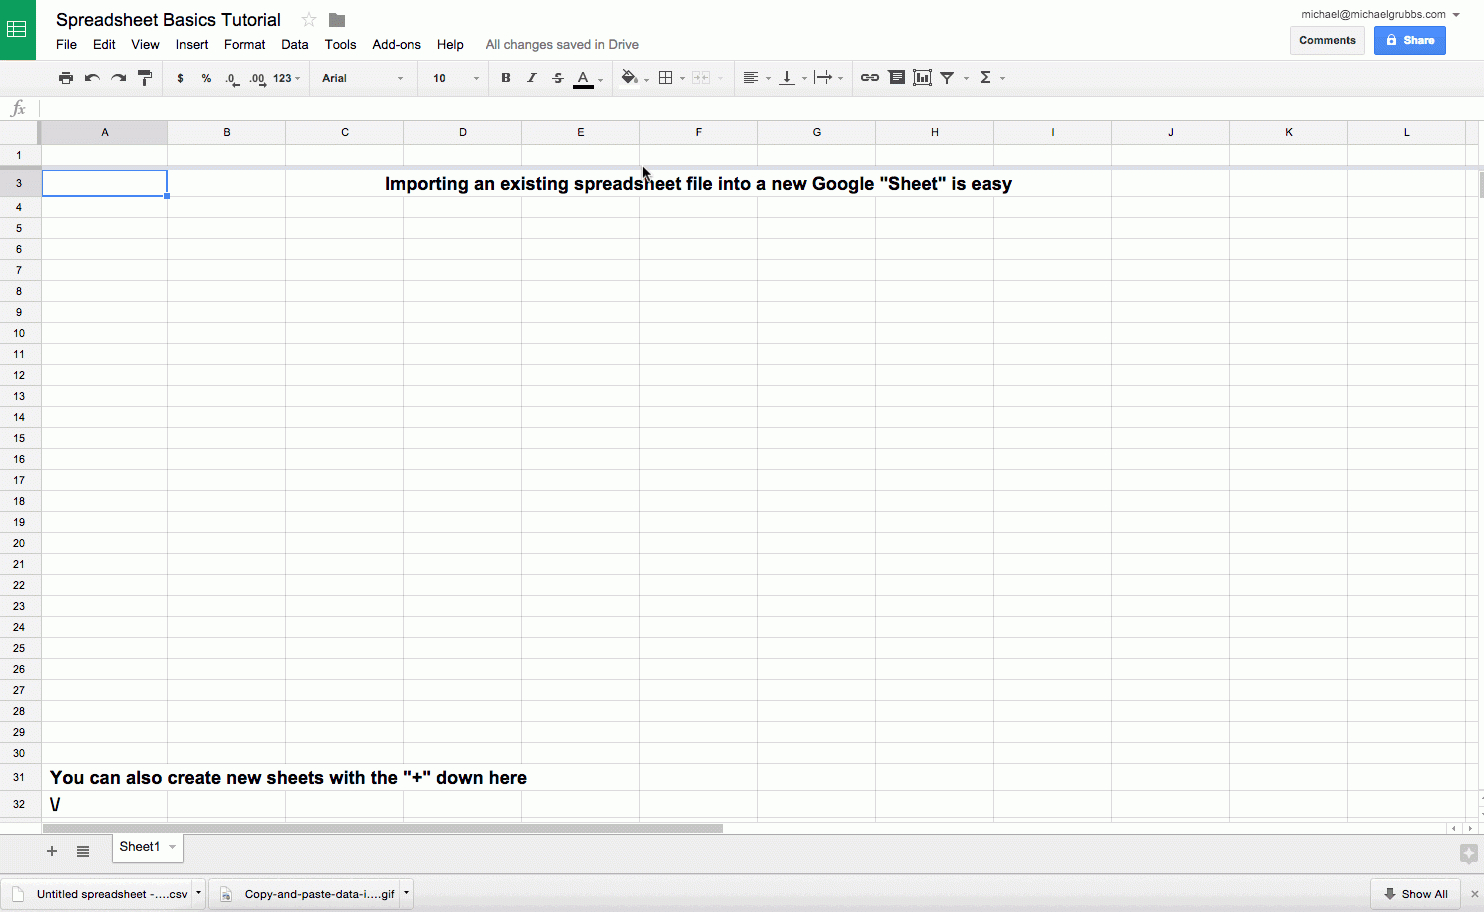 How To Make An Excel Spreadsheet Shared In Google Sheets 101: The Beginner's Guide To Online Spreadsheets  The